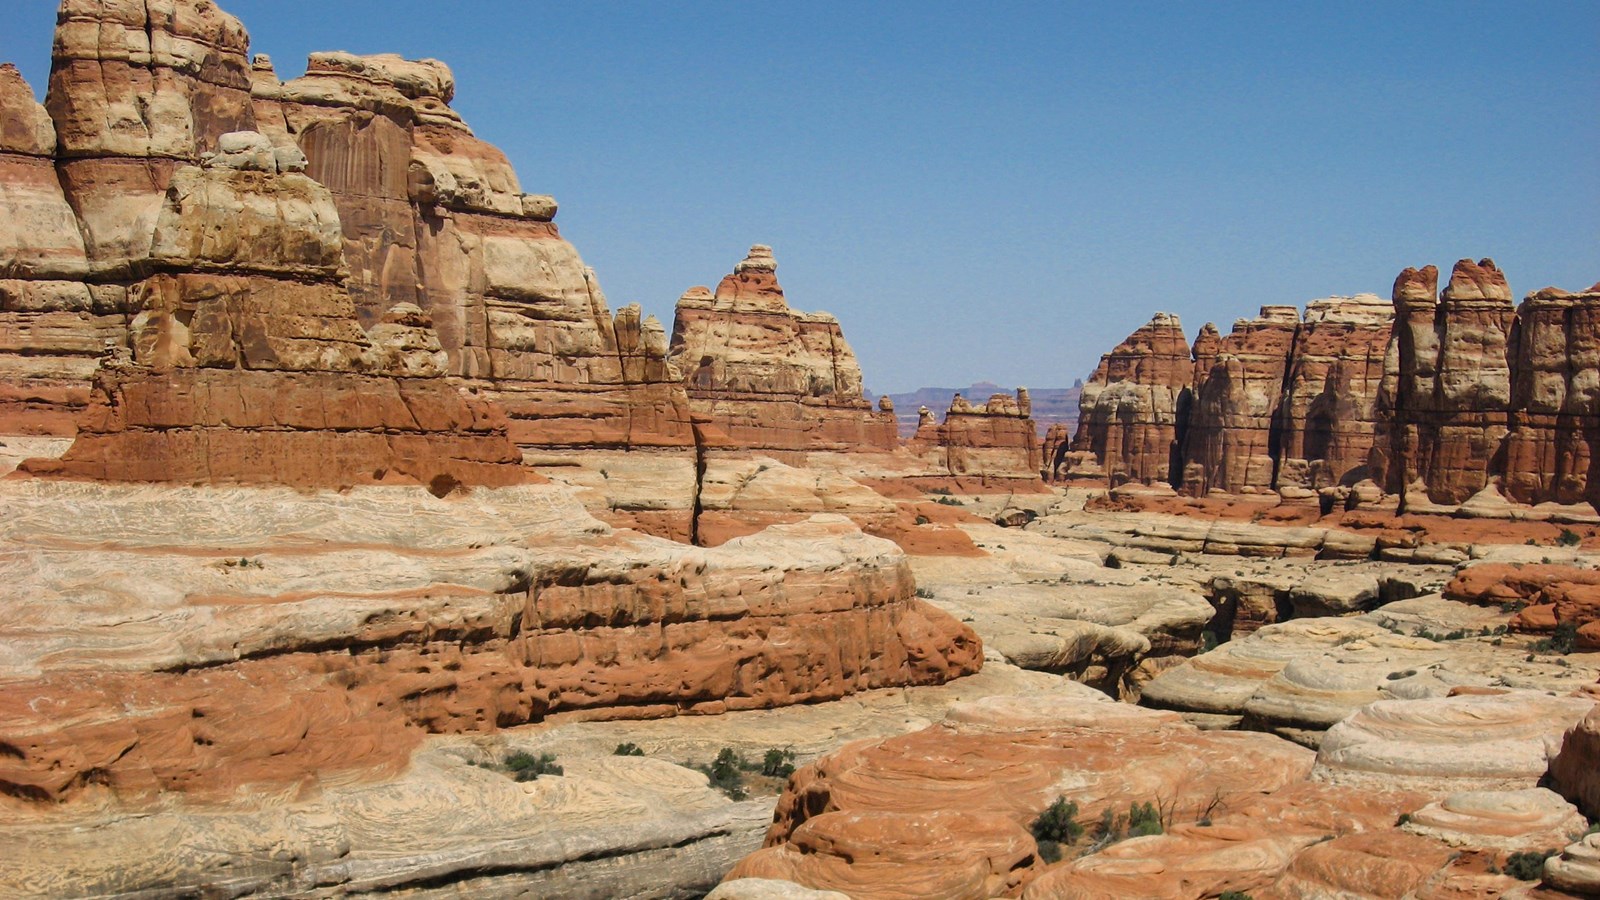 Multicolored sandstone spires spring up from a canyon